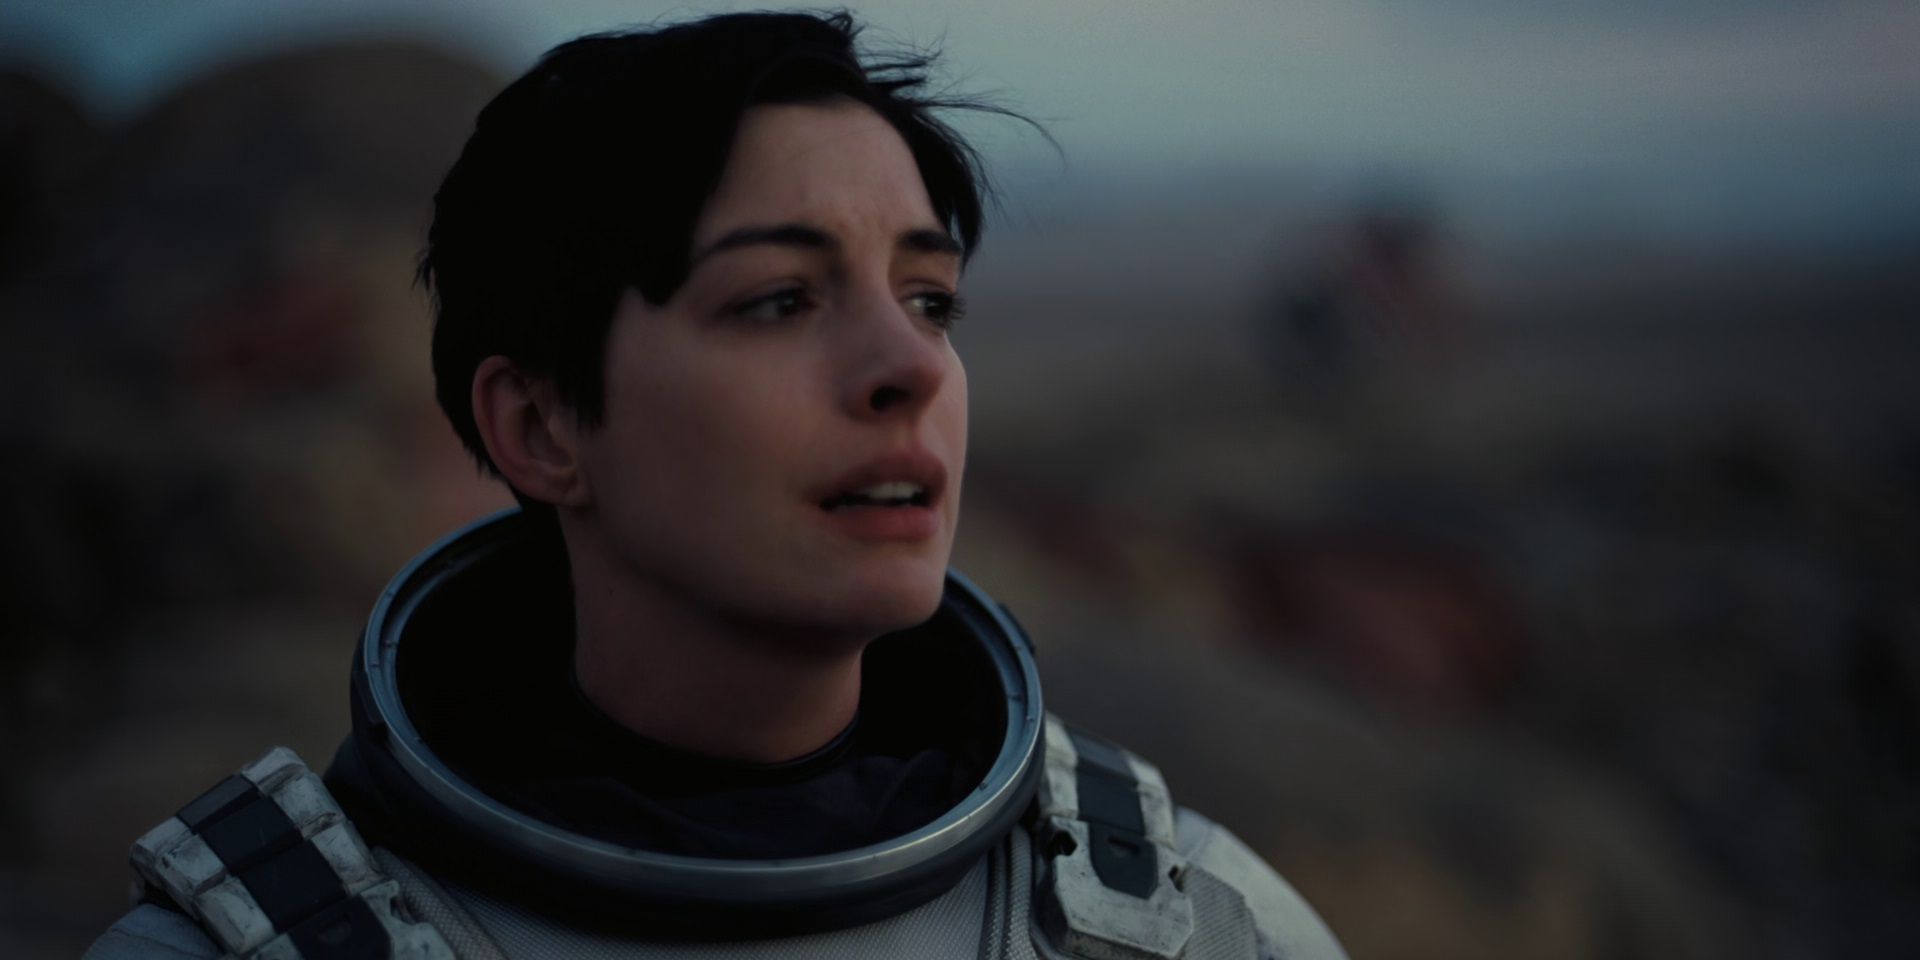 Anne Hathaway looks on in tears at the end of Interstellar